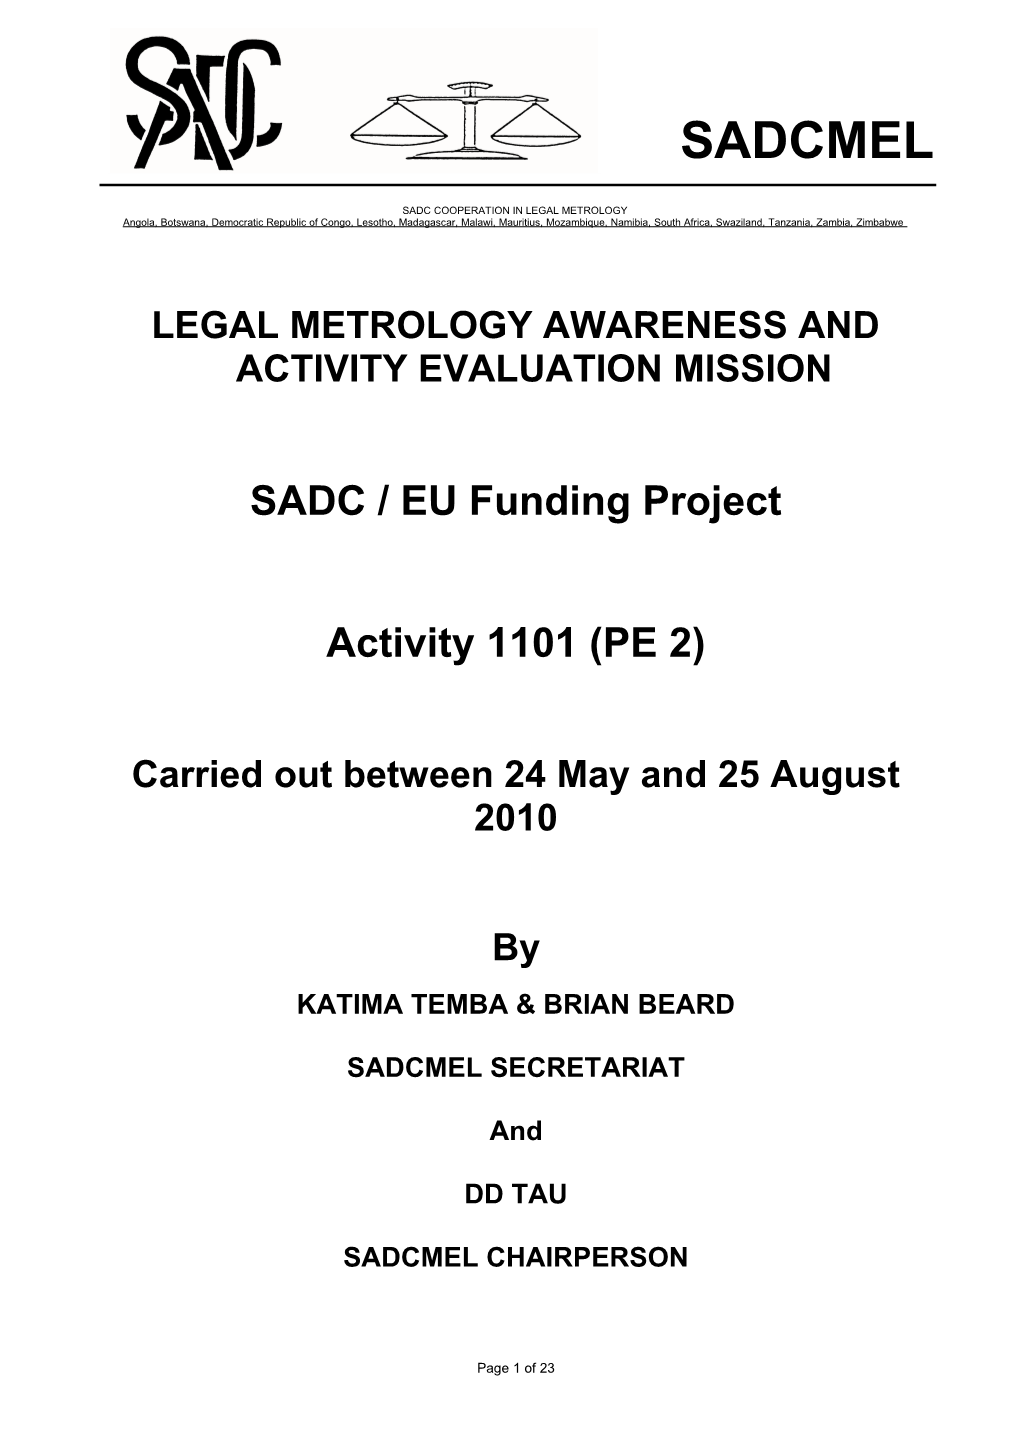 Legal Metrology Awareness and Activity Evaluation Mission